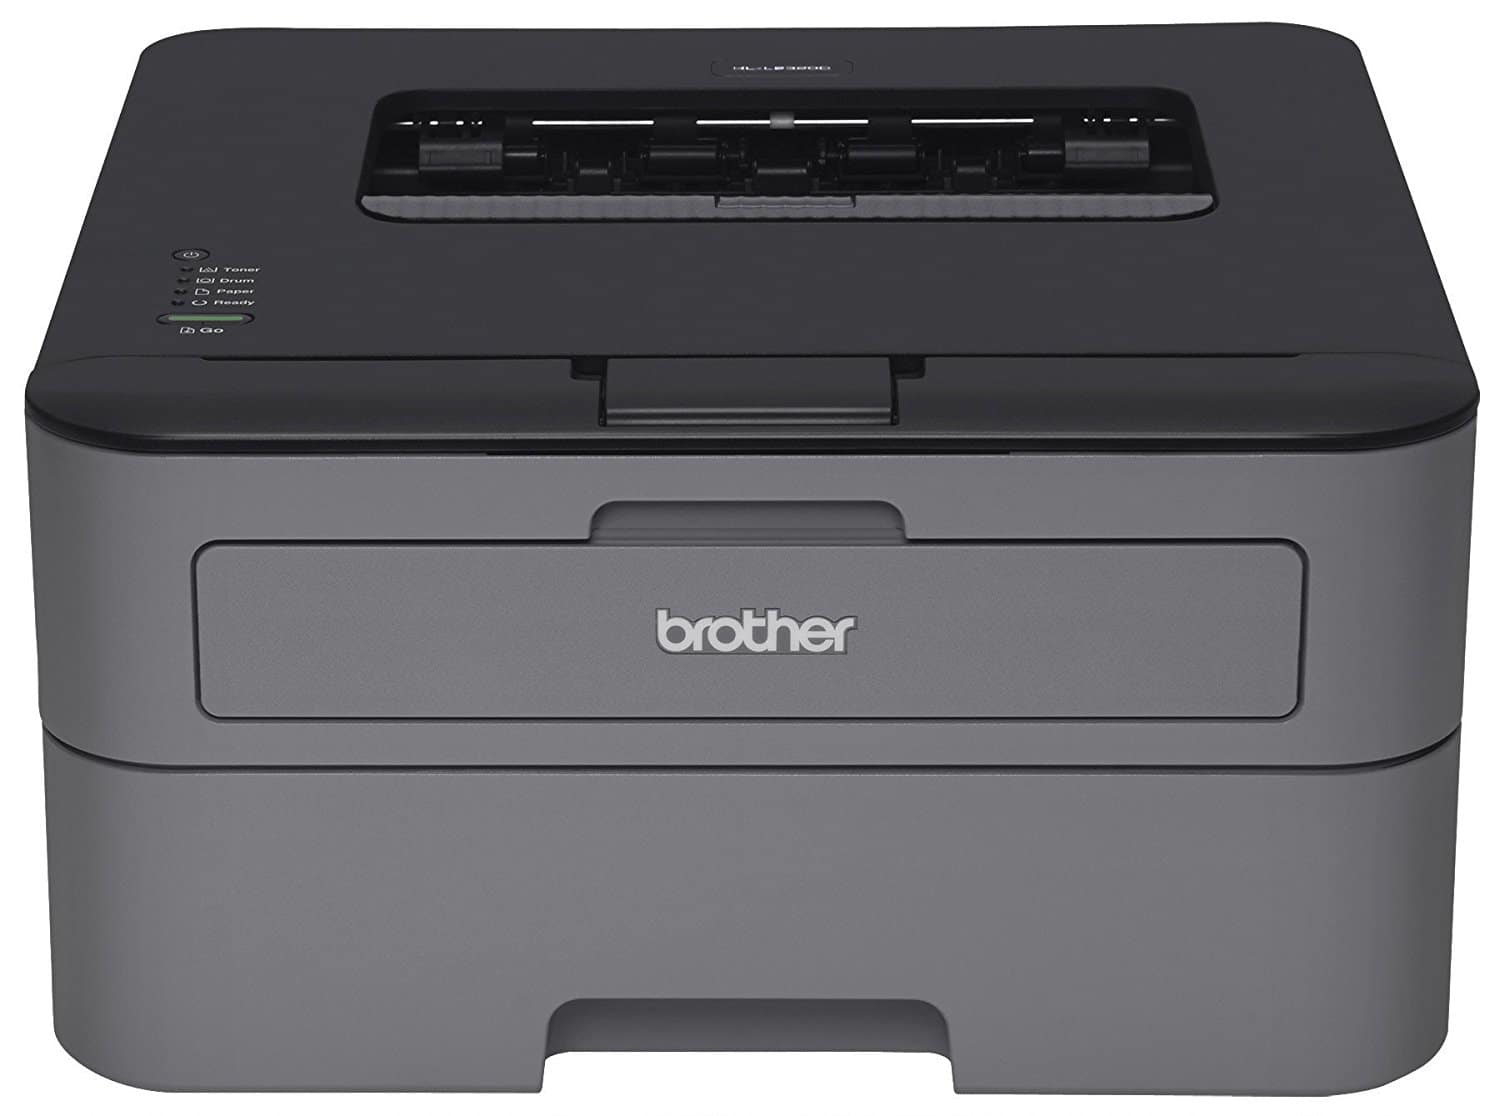 DEAL ALERT: Brother Monochrome Laser Printer with Duplex Printing – 25% off